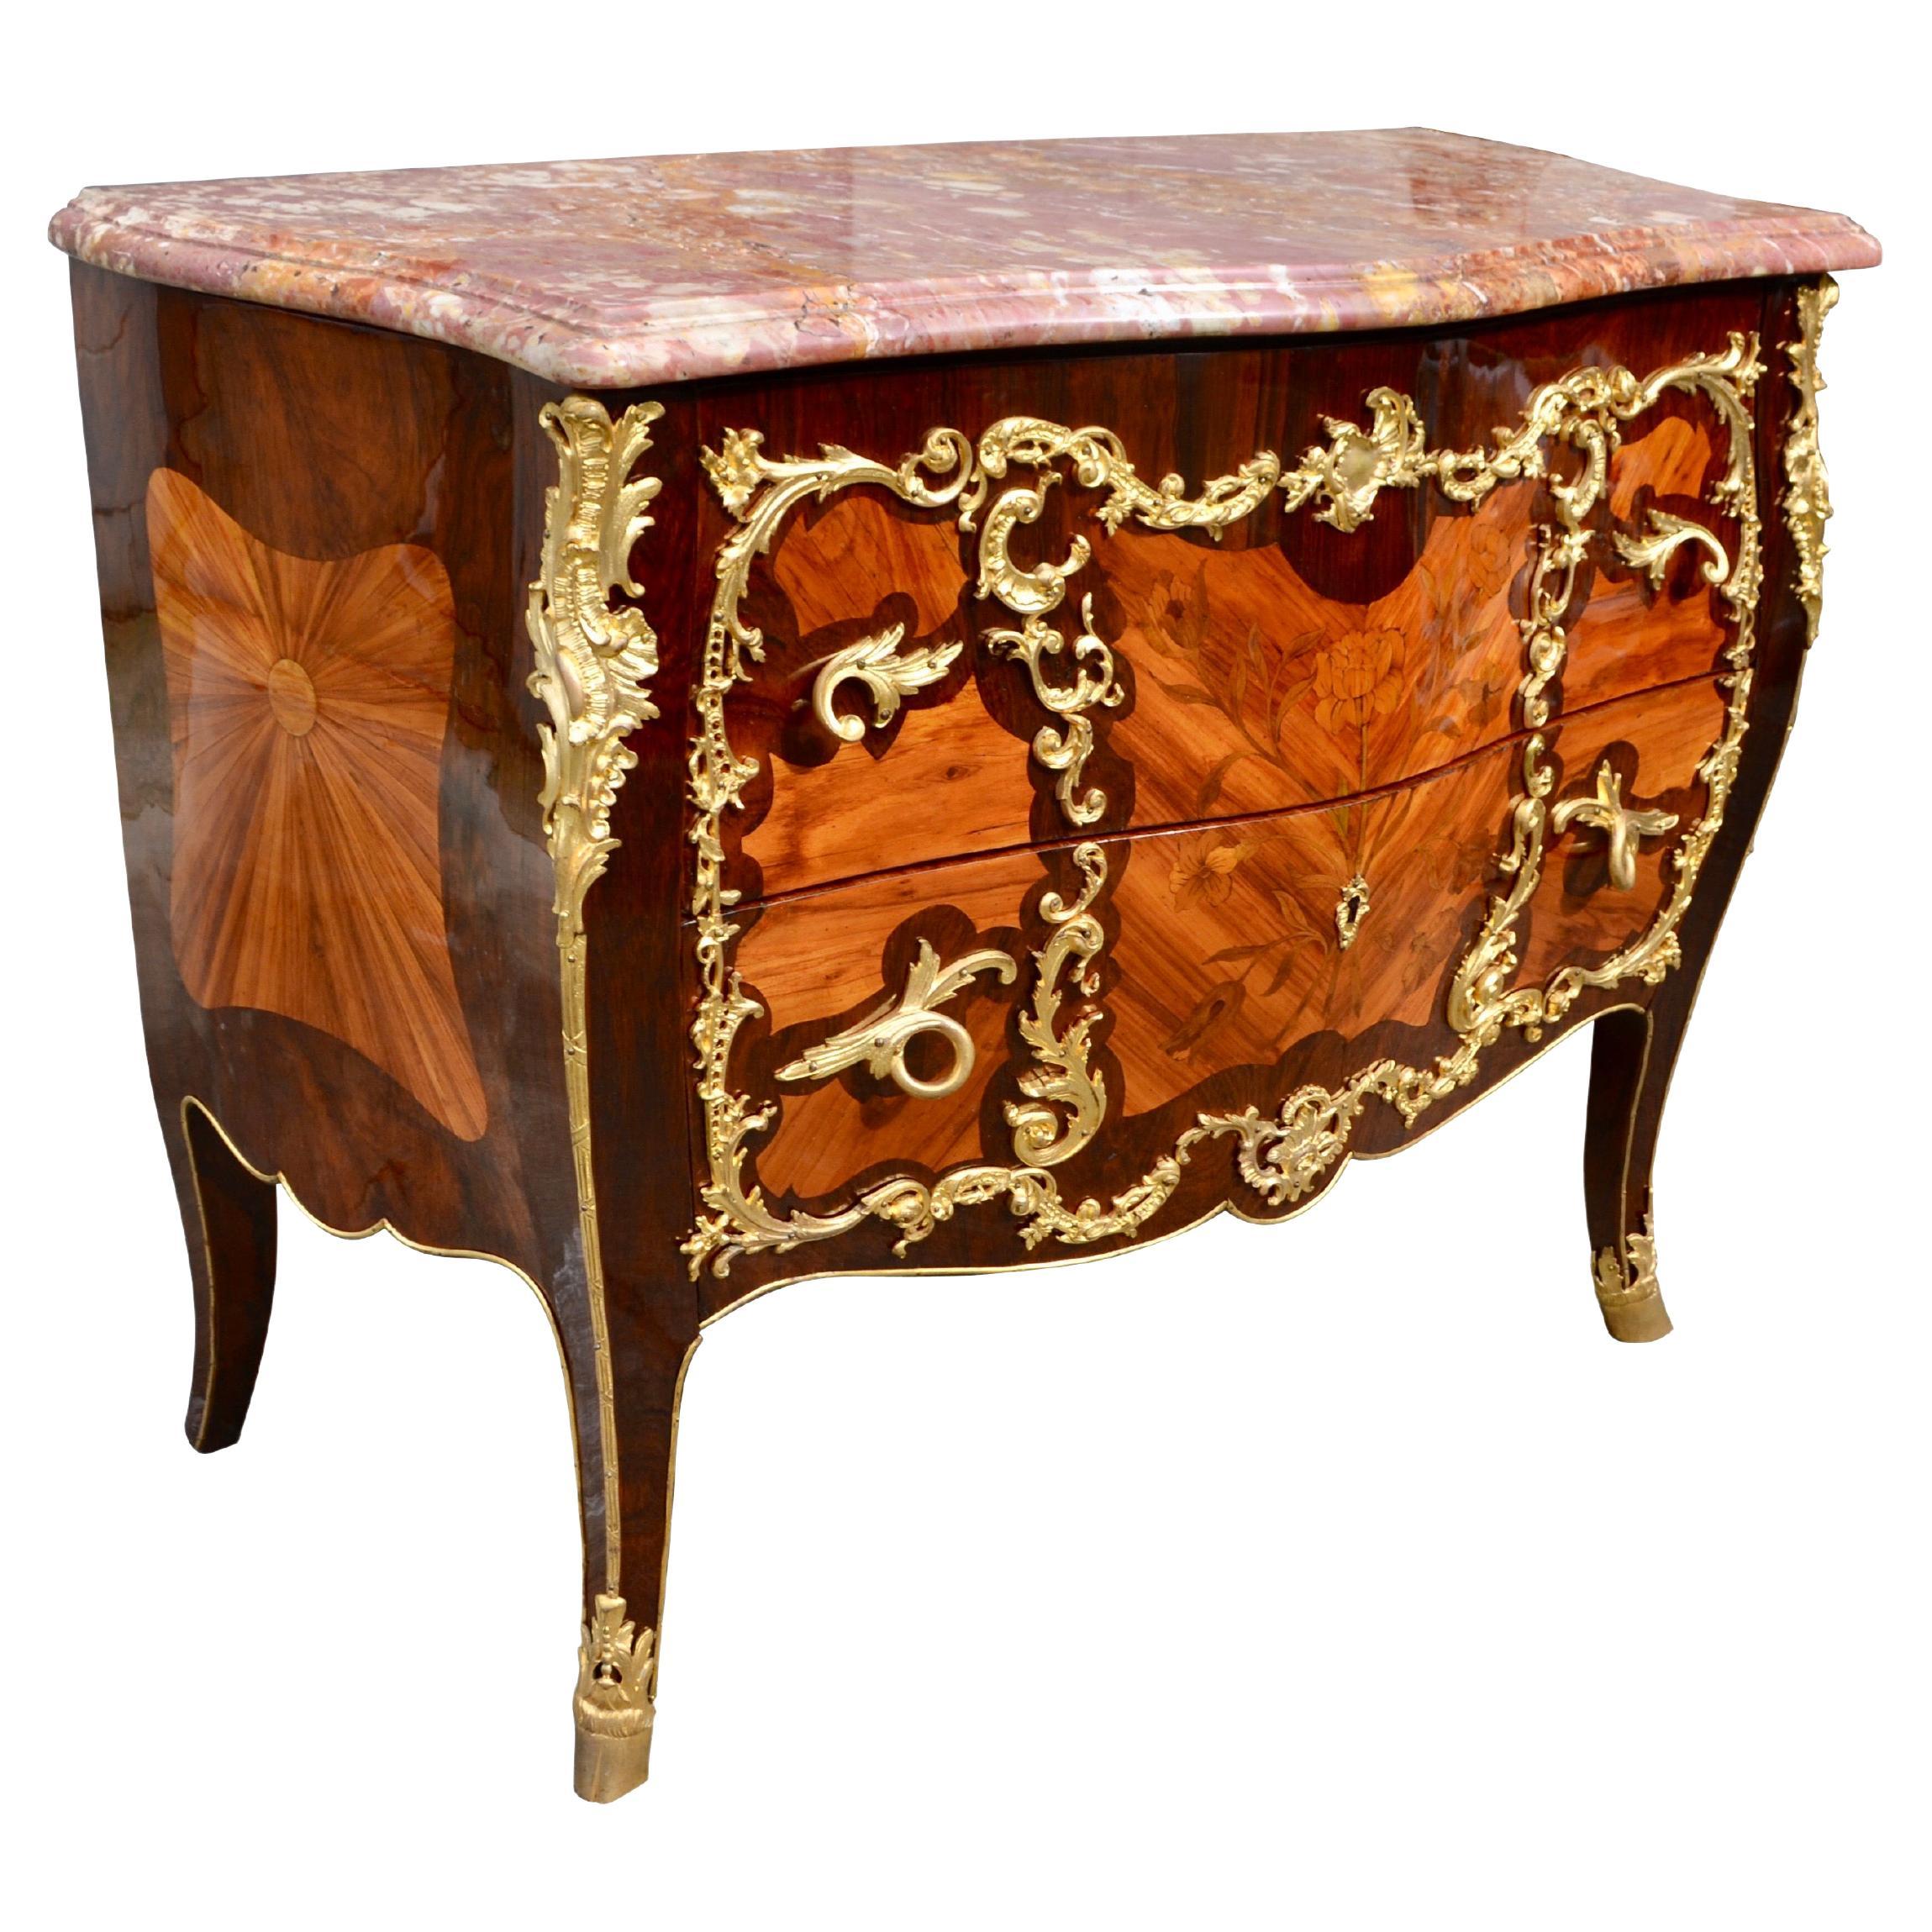 19th Century French Louis XV Style Marquetry and Ormolu Bombe Chest of Drawers For Sale